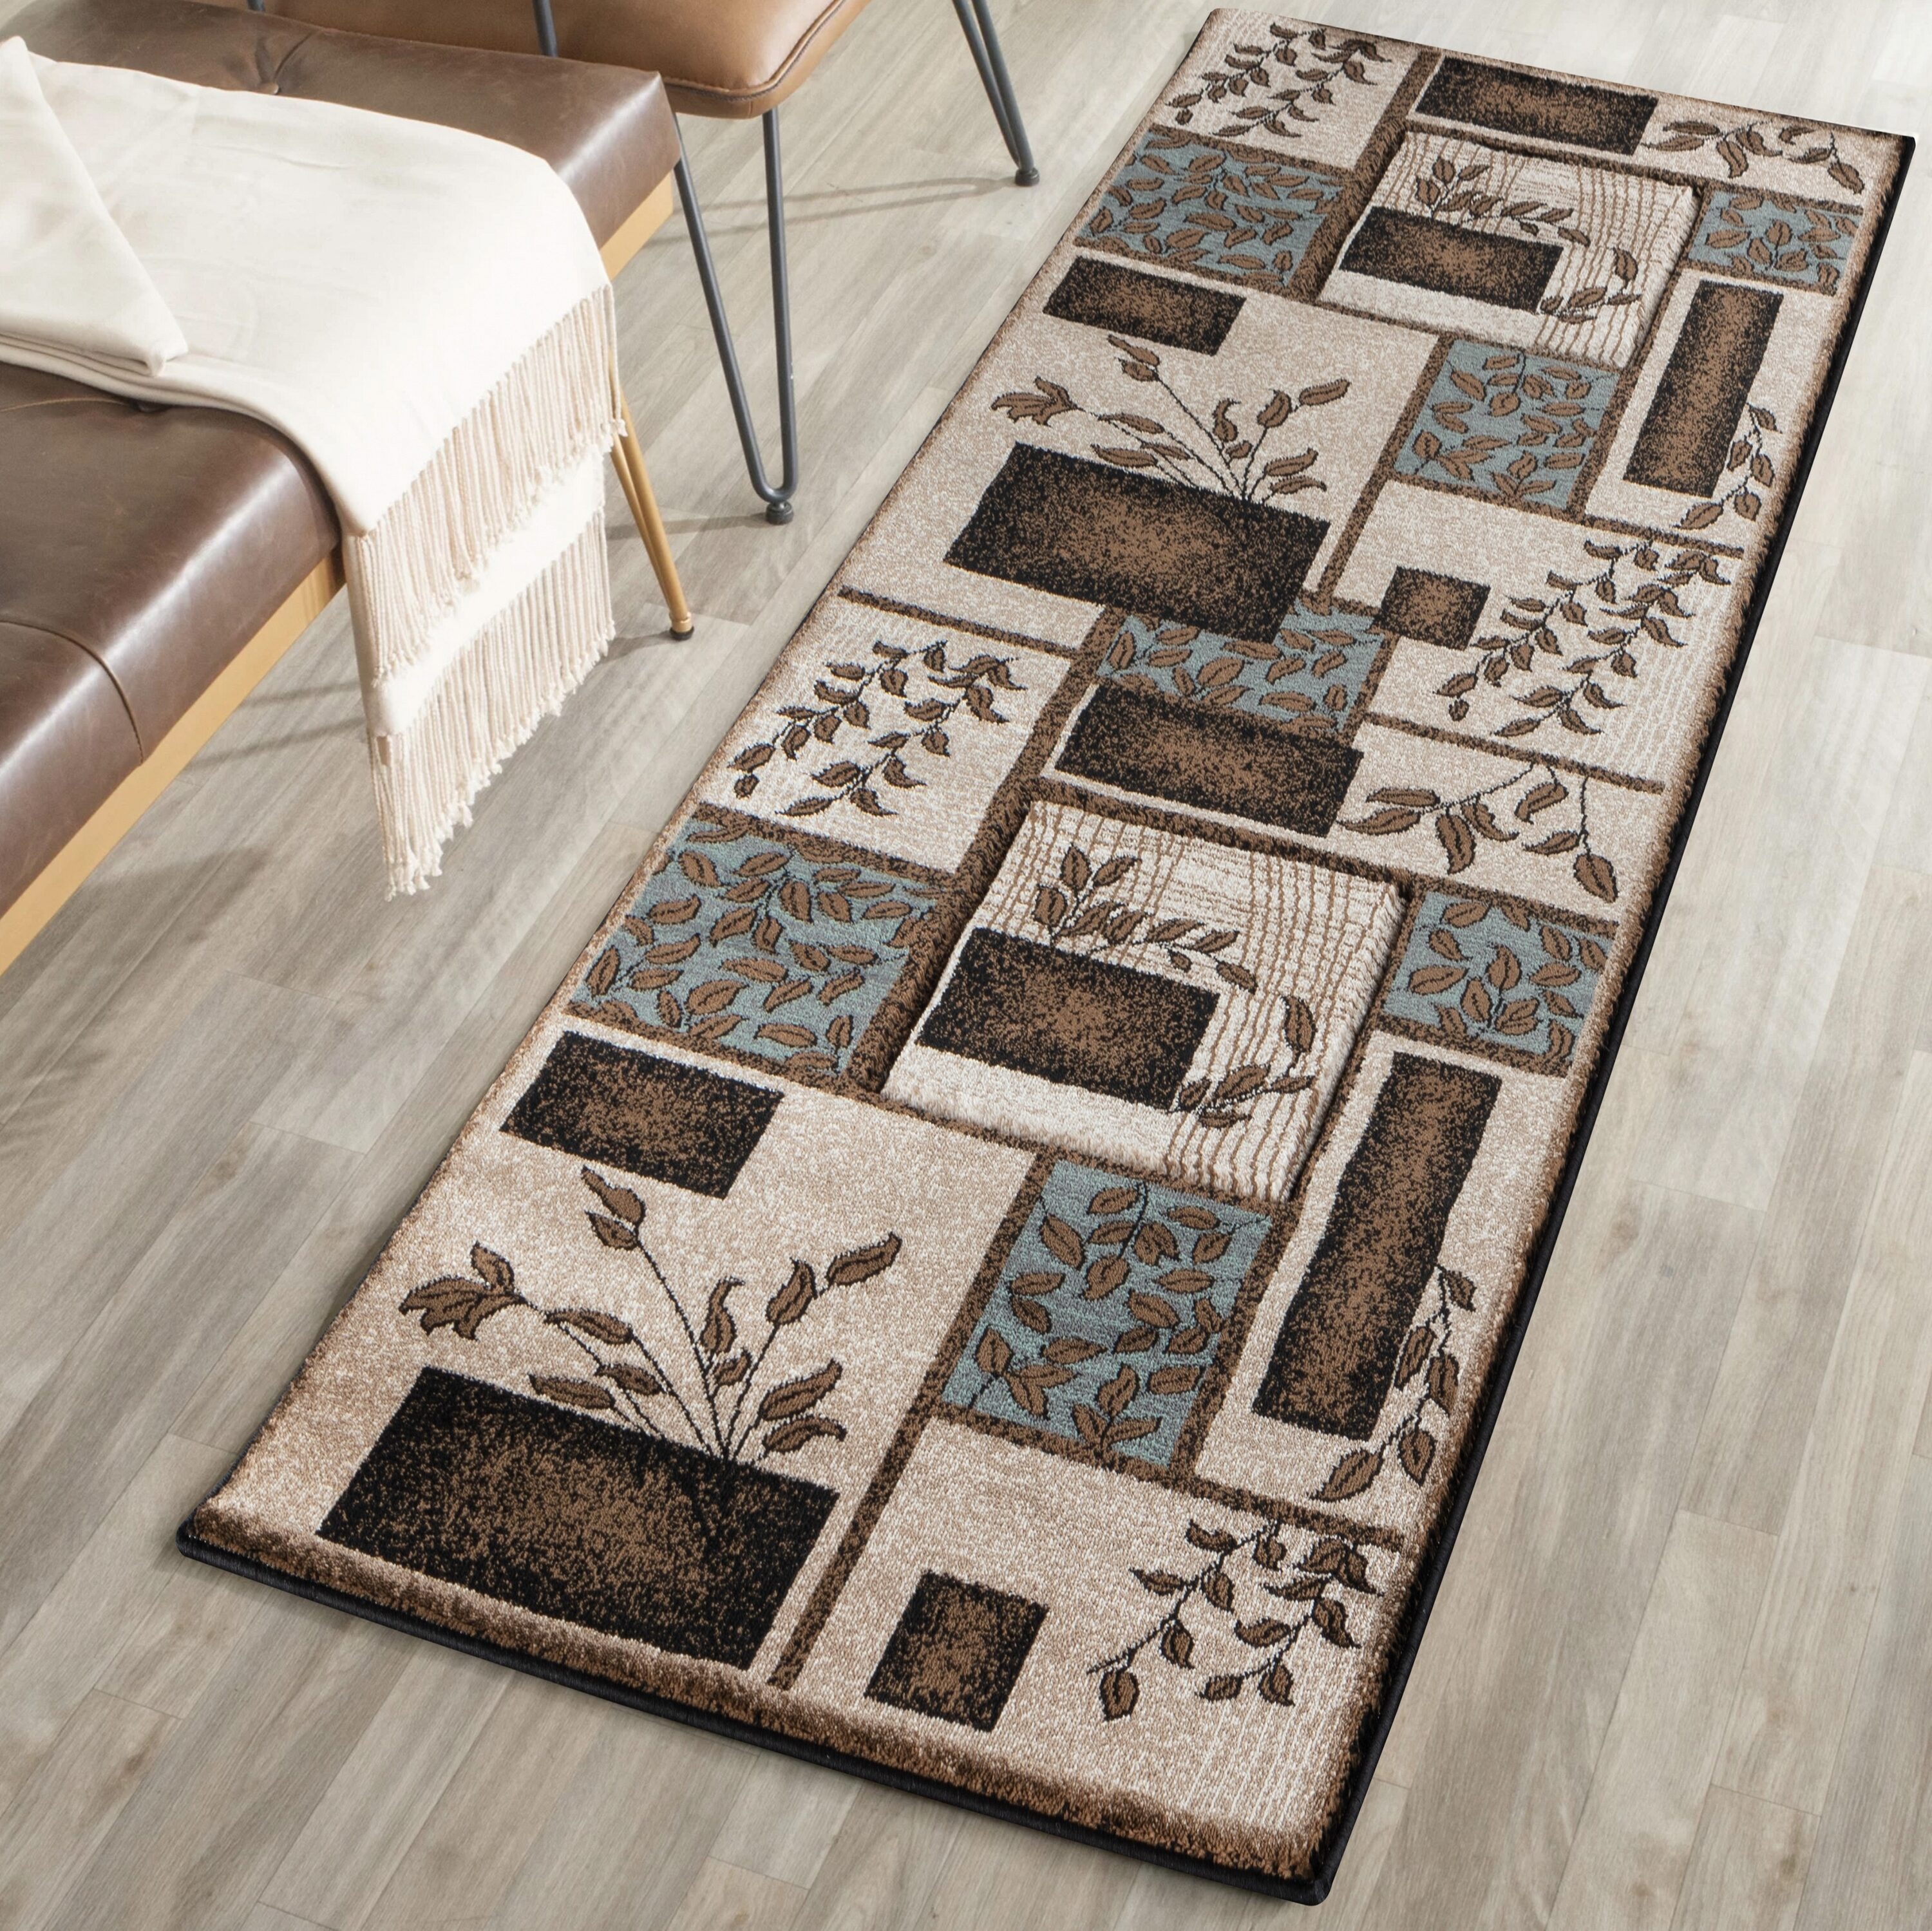 Runner Rugs at Lowes.com